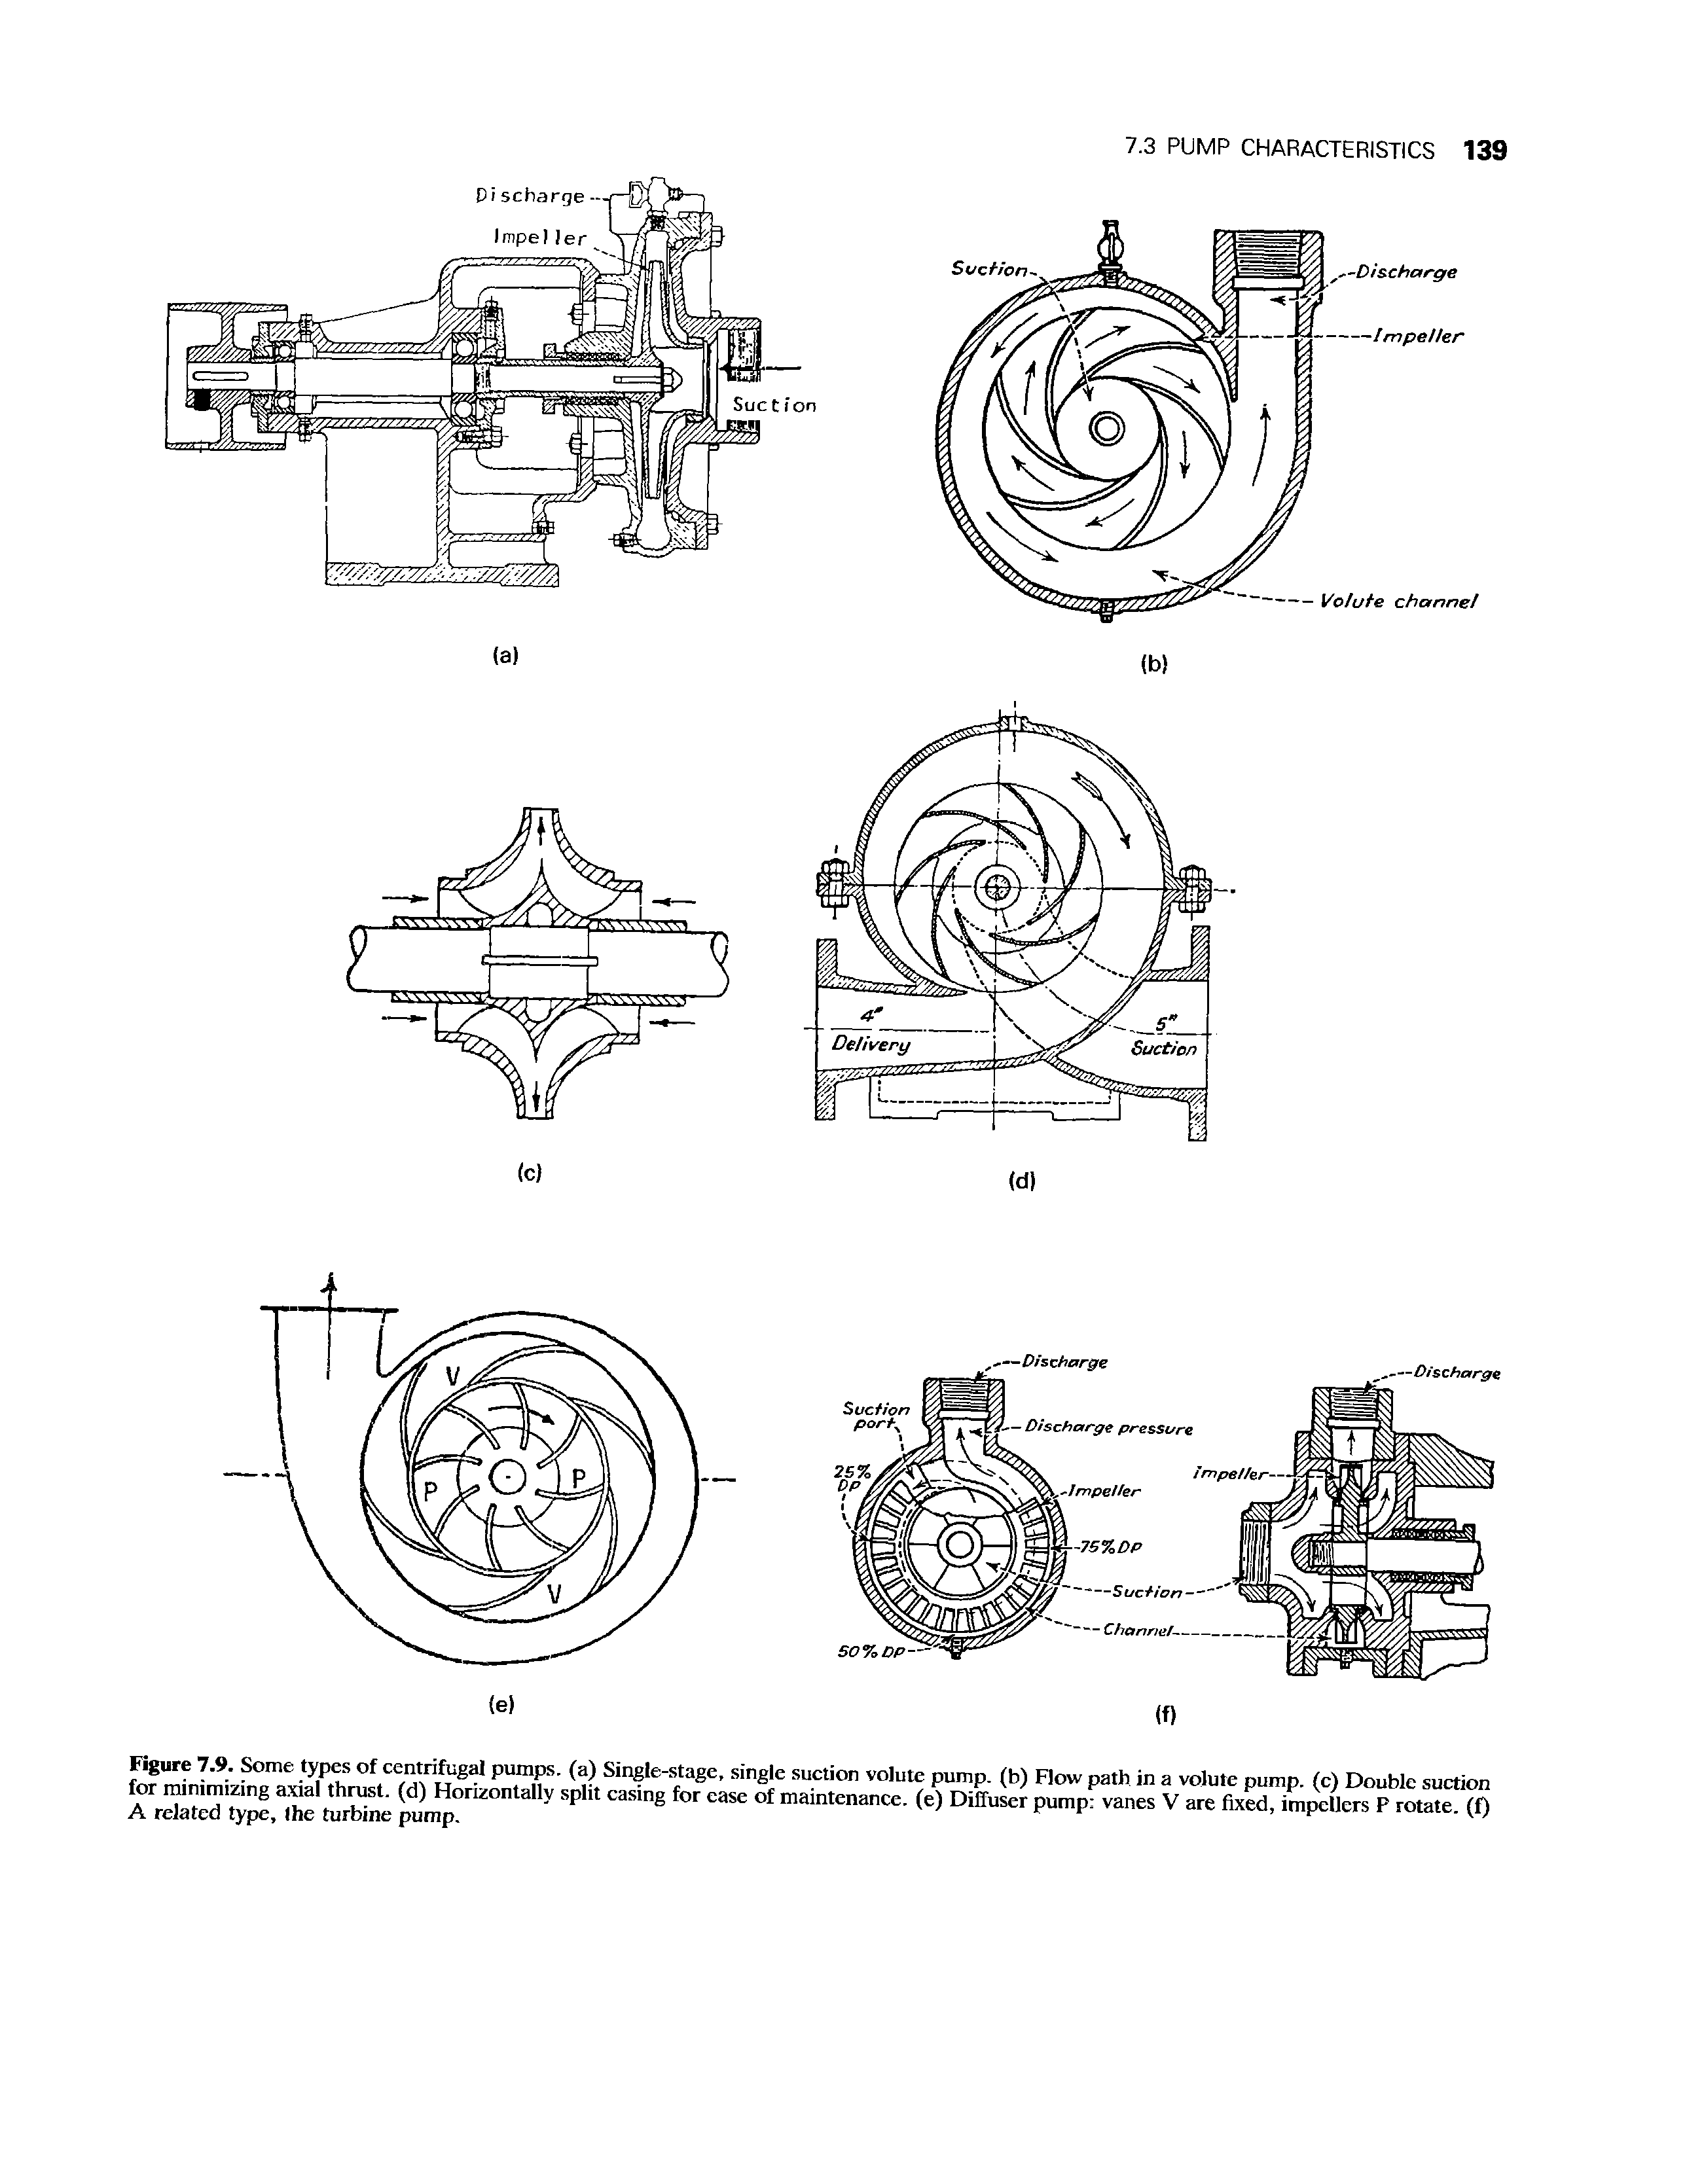 Figure 7.9. Some types of centrifugal pumps, (a) Single-stage, single suction volute pump, (b) Flow path in a volute pump, (c) Double suction for minimizing axial thrust, (d) Horizontally split casing for ease of maintenance, (e) Diffuser pump vanes V are fixed, impellers P rotate, (f) A related type, Ihe turbine pump.